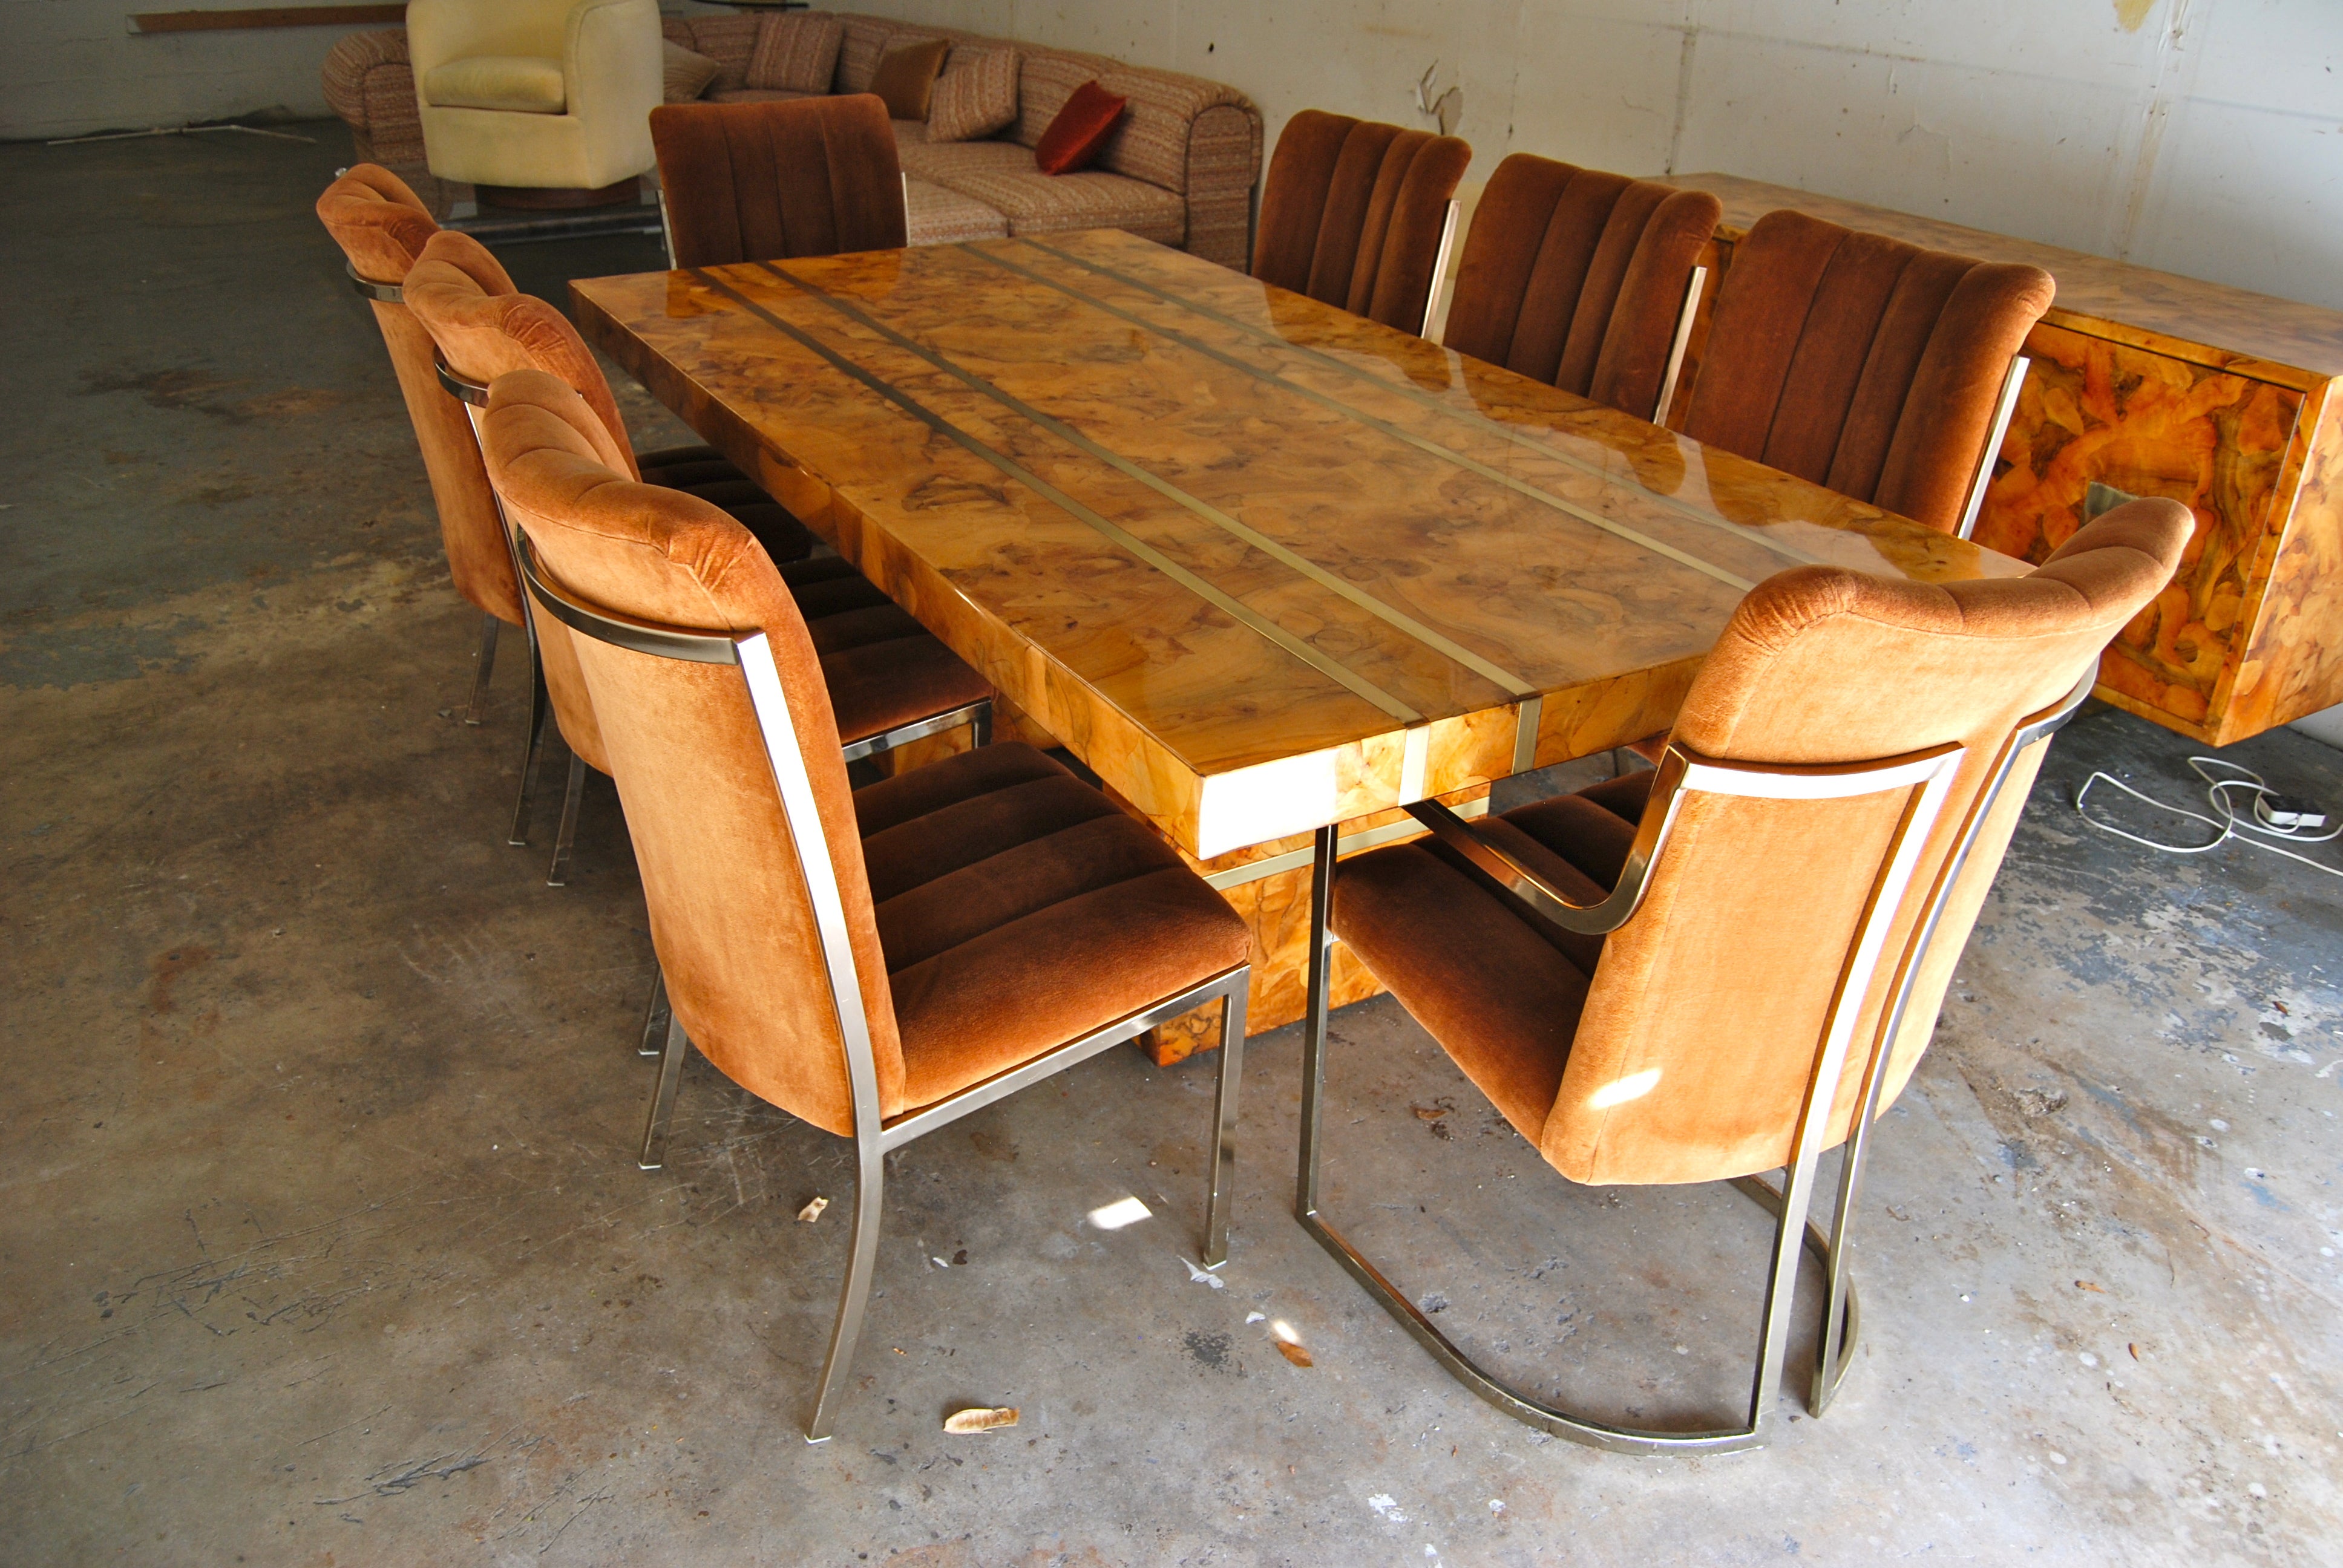 Oyster Burl Wood Table And Chairs